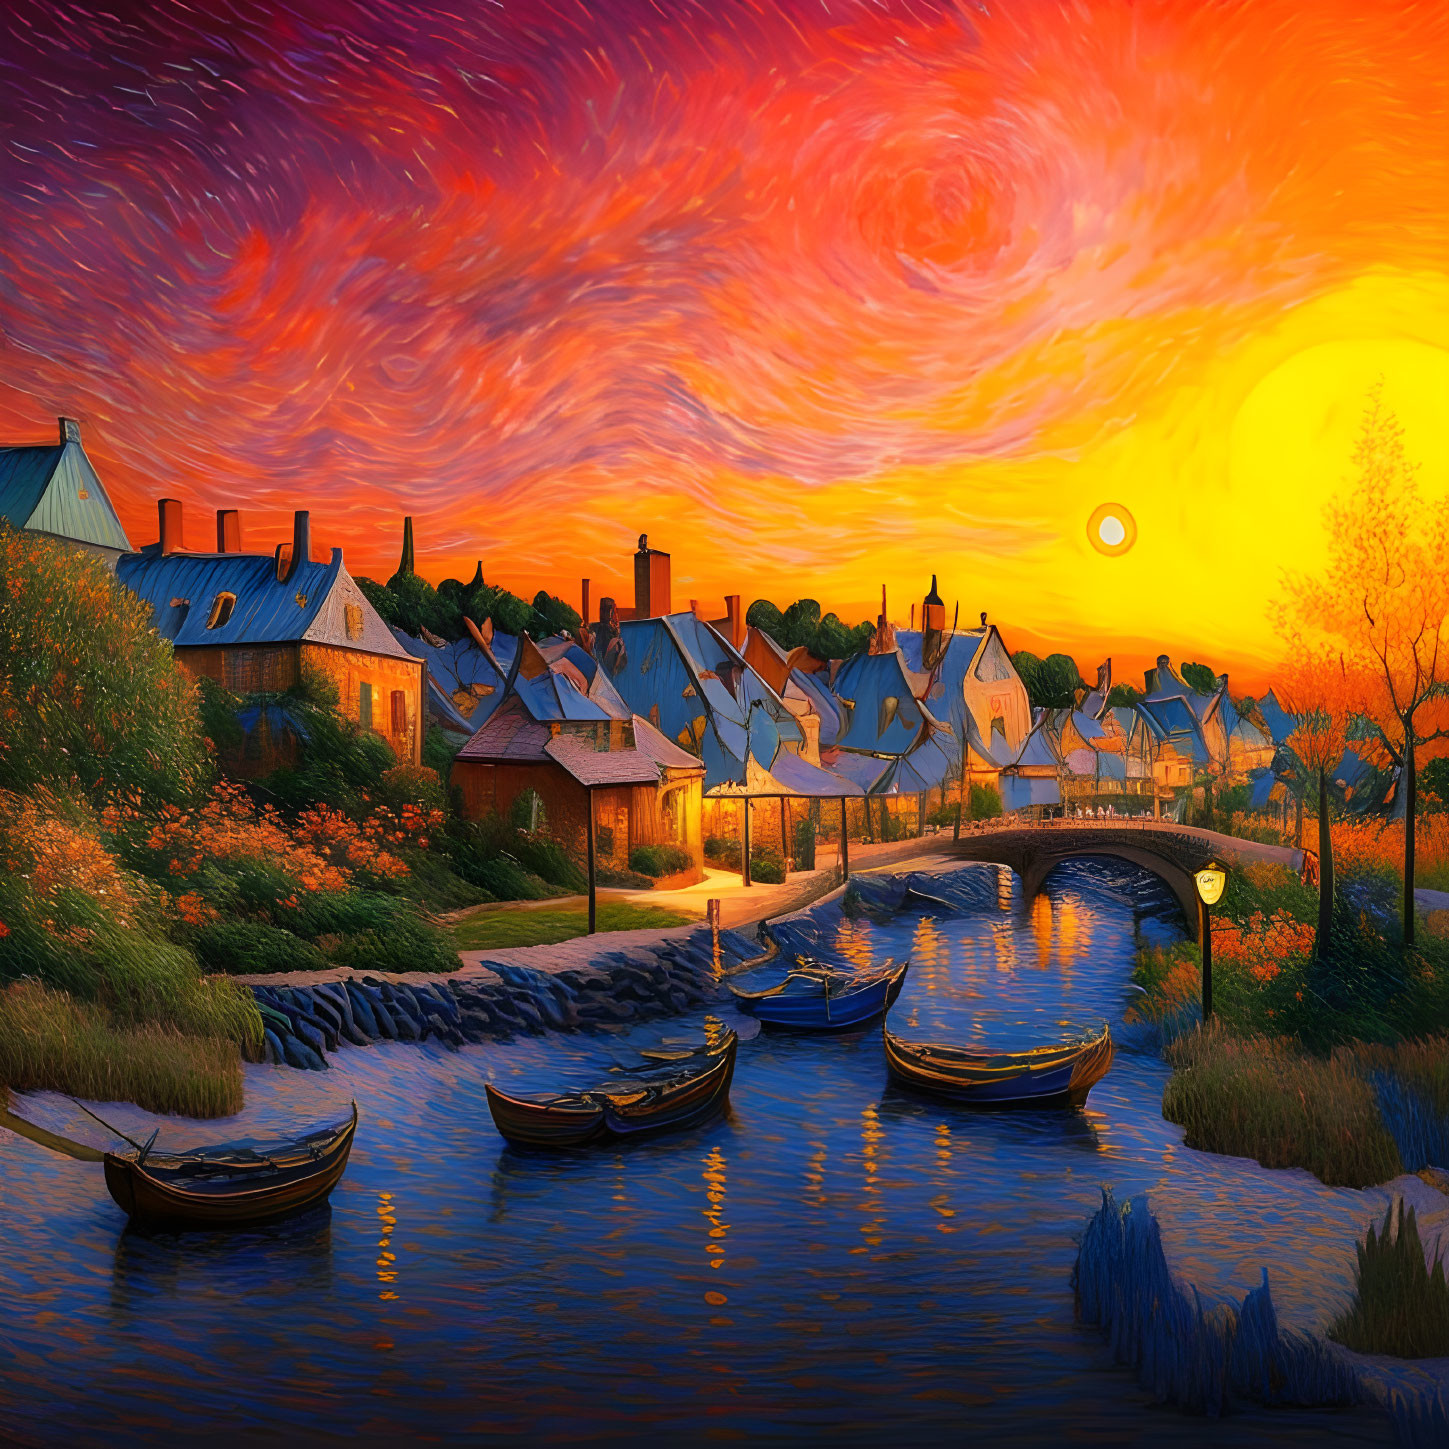 Scenic sunset view of riverside village with boats and cobblestone bridge